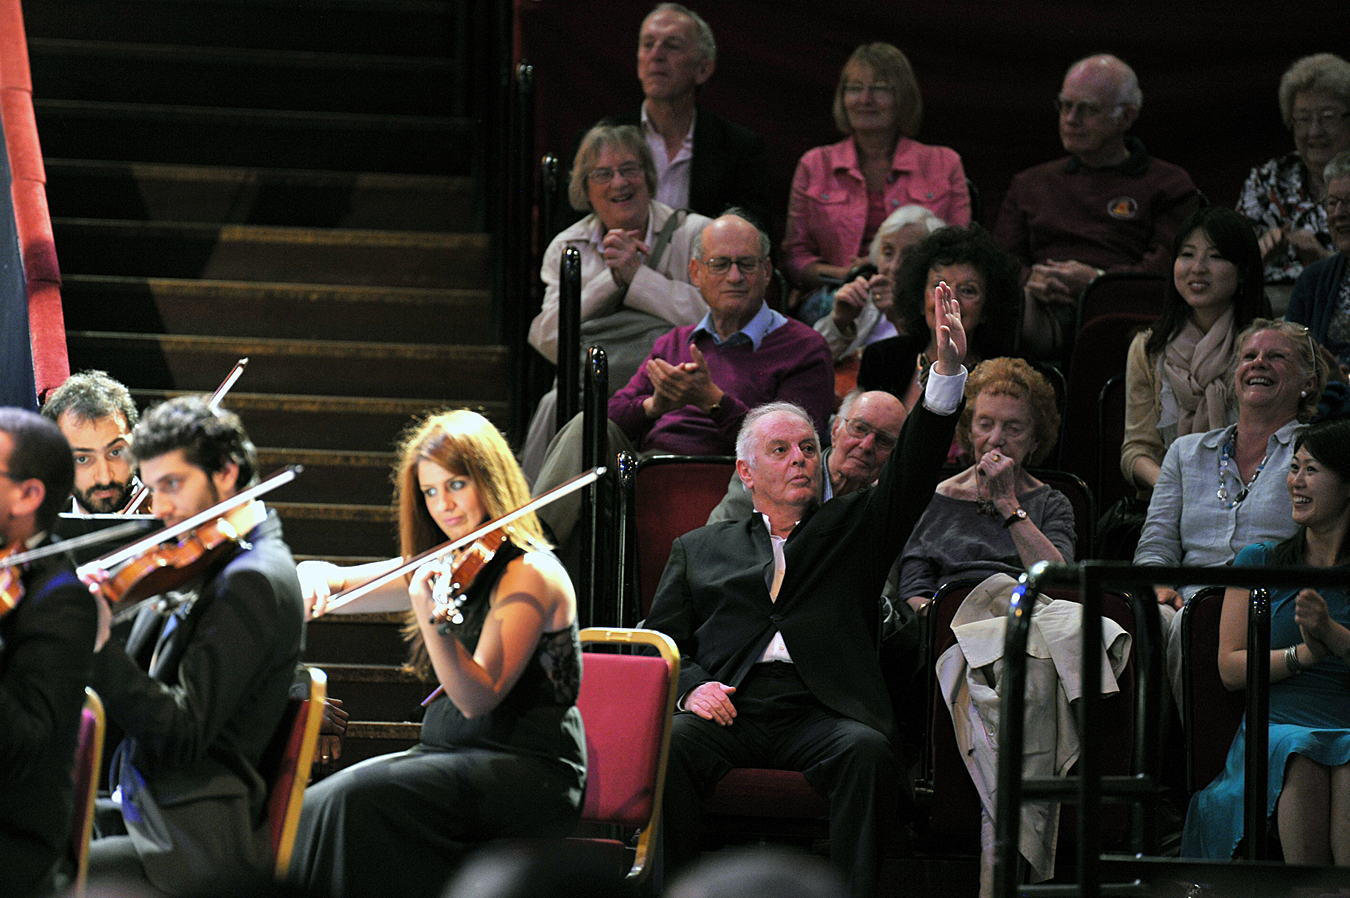 Barenboim sitting out a West-Eastern Divan Orchestra encore at the Proms